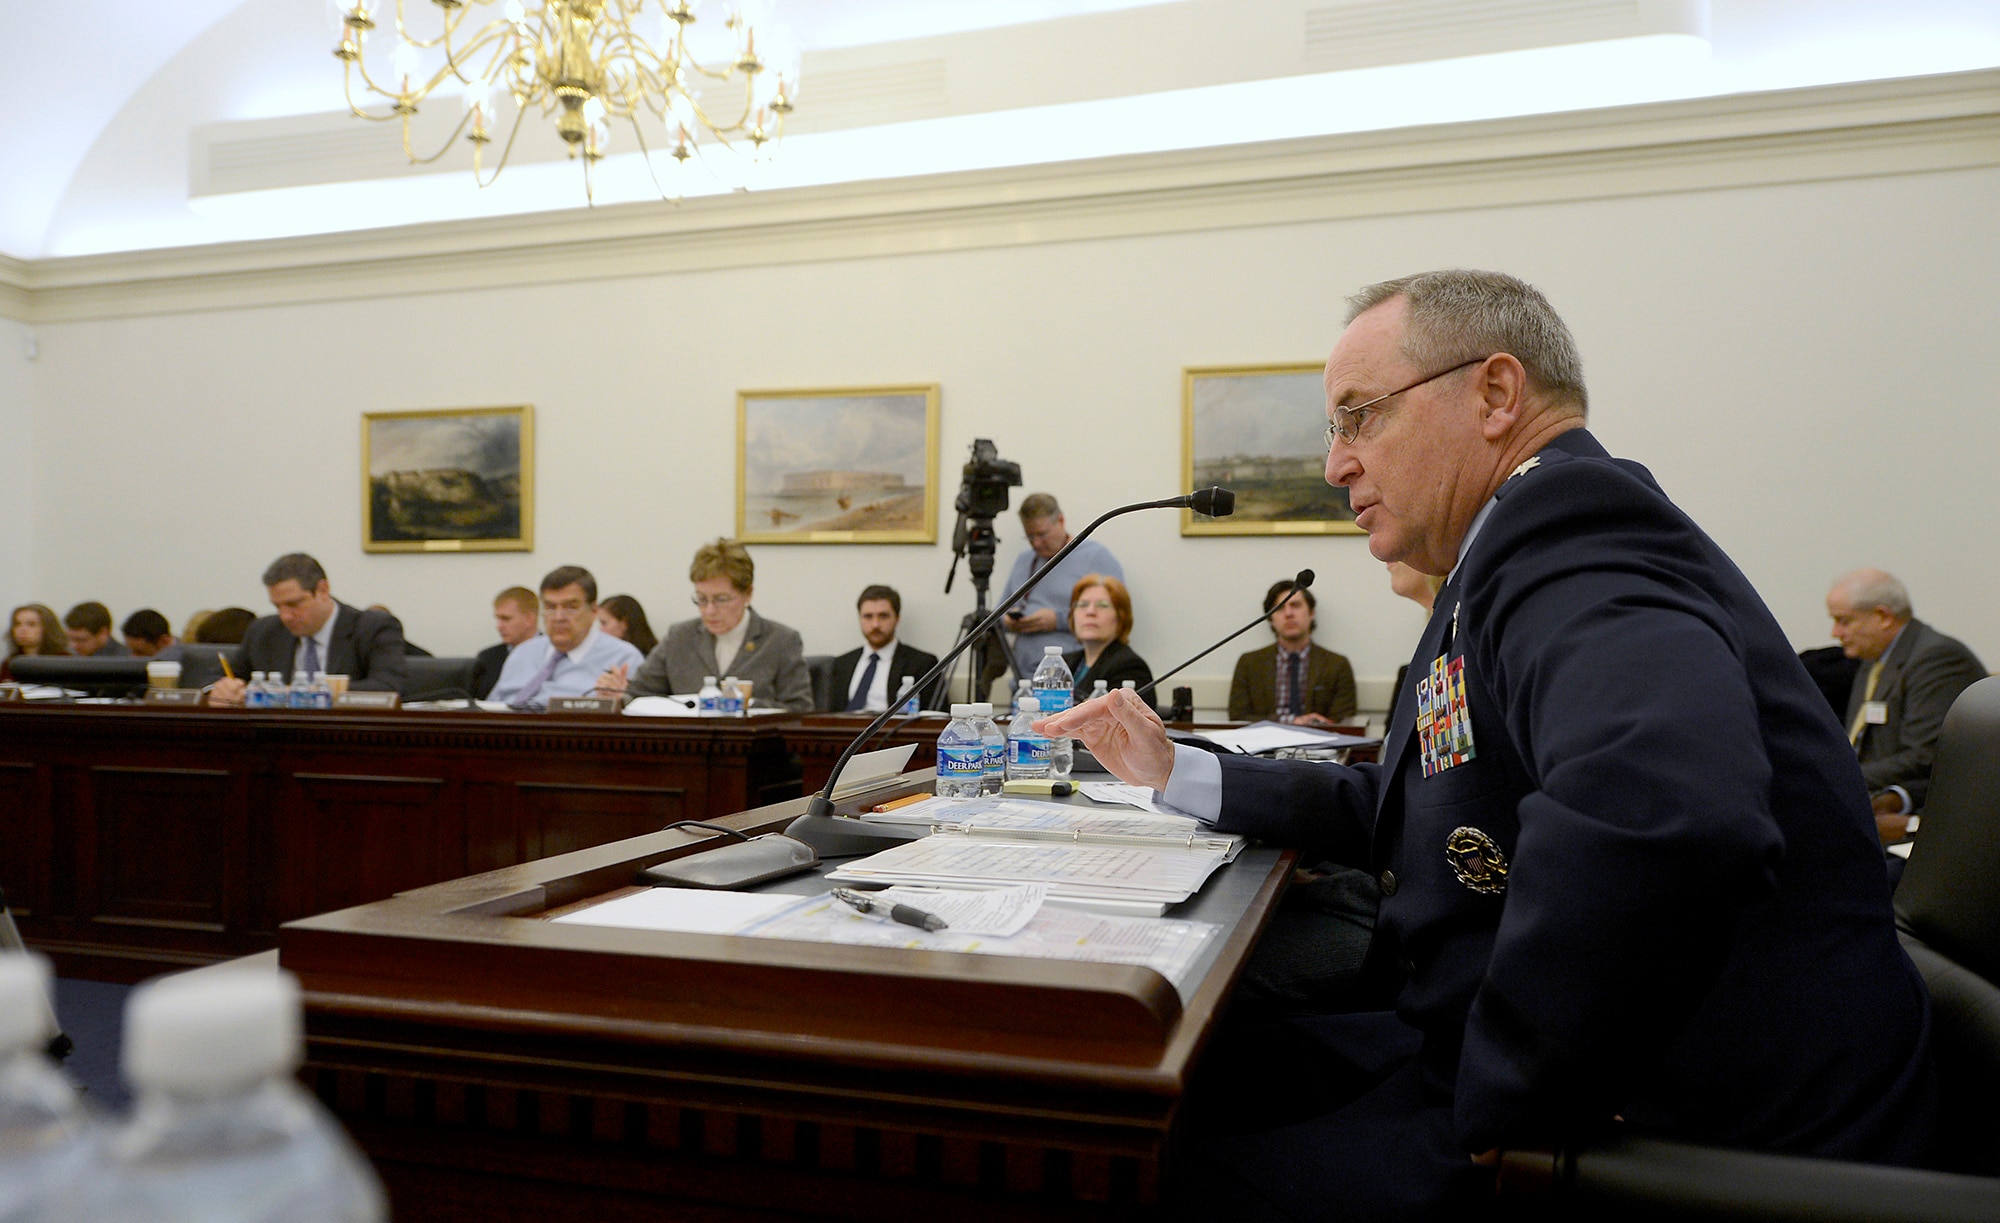 Air Force Chief of Staff Gen. Mark A. Welsh III testifies before the House of Representatives Committee on Appropriations’ Defense Subcommittee, Feb. 27, 2015, in Washington. D.C. Welsh and Secretary of the Air Force Deborah Lee James met with the House members to discuss the Air Force's Fiscal Year 2016 President's Budget Request. (U.S. Air Force photo/Scott M. Ash)